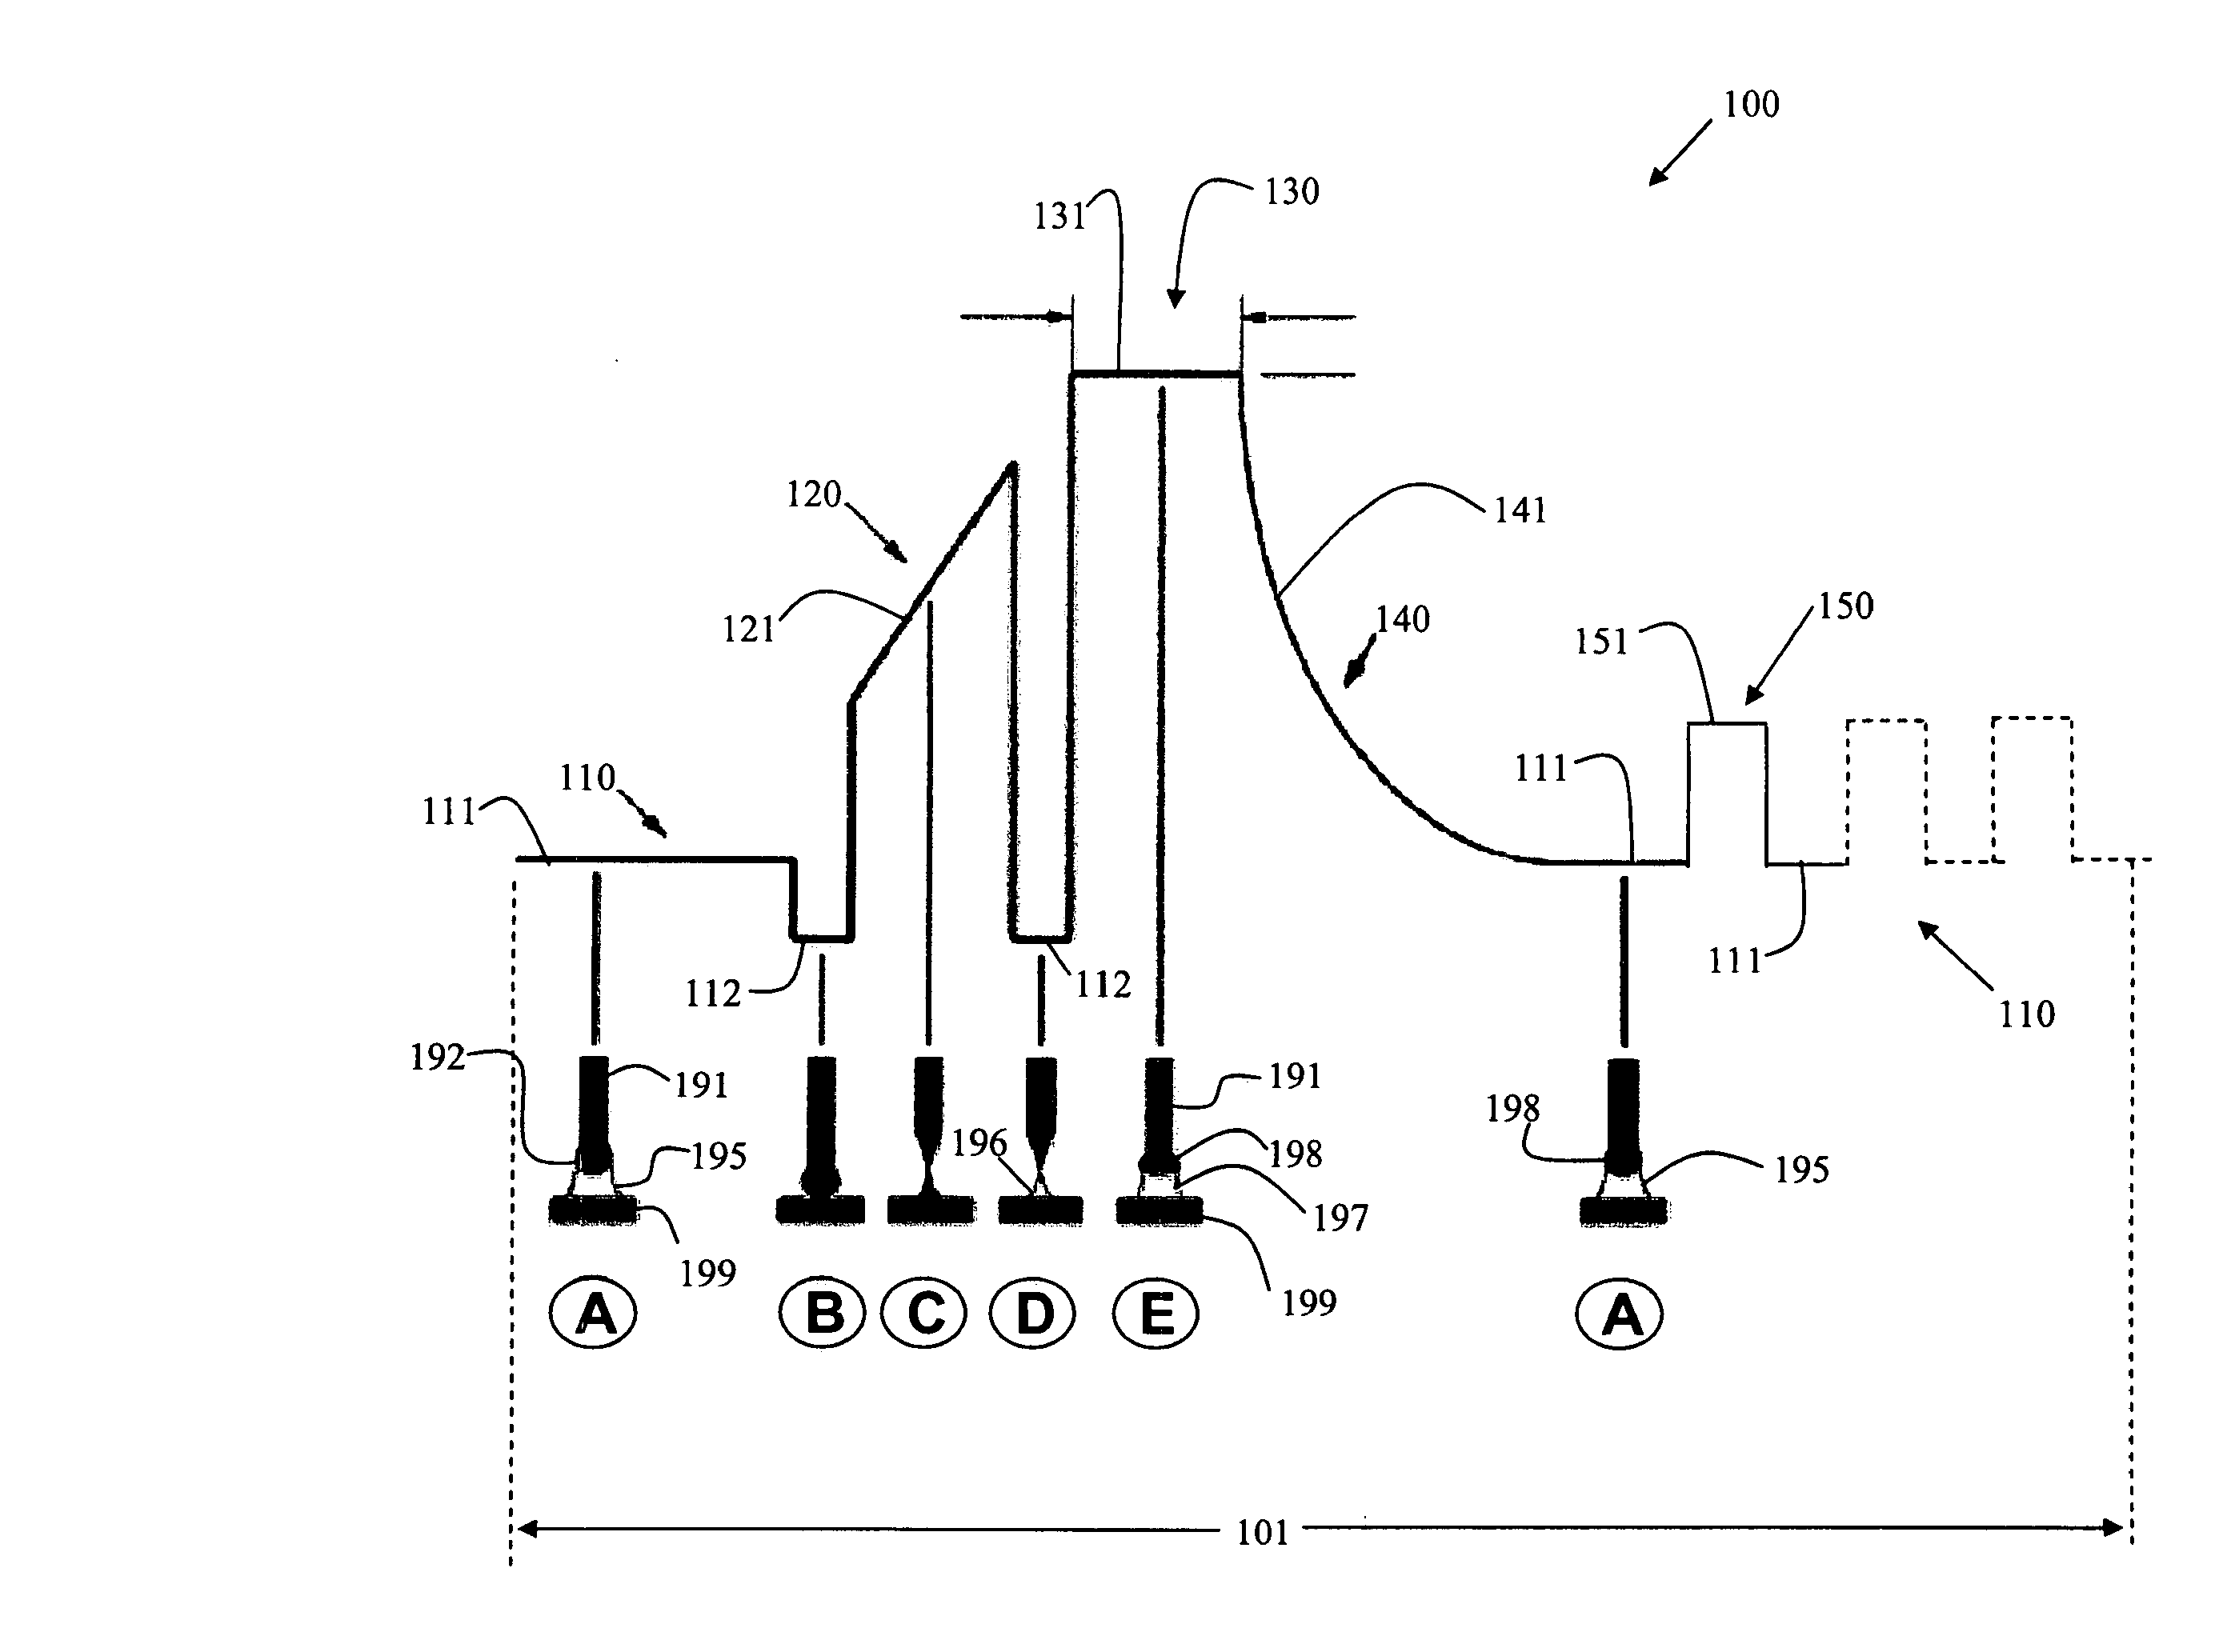 Method and system to increase heat input to a weld during a short-circuit arc welding process